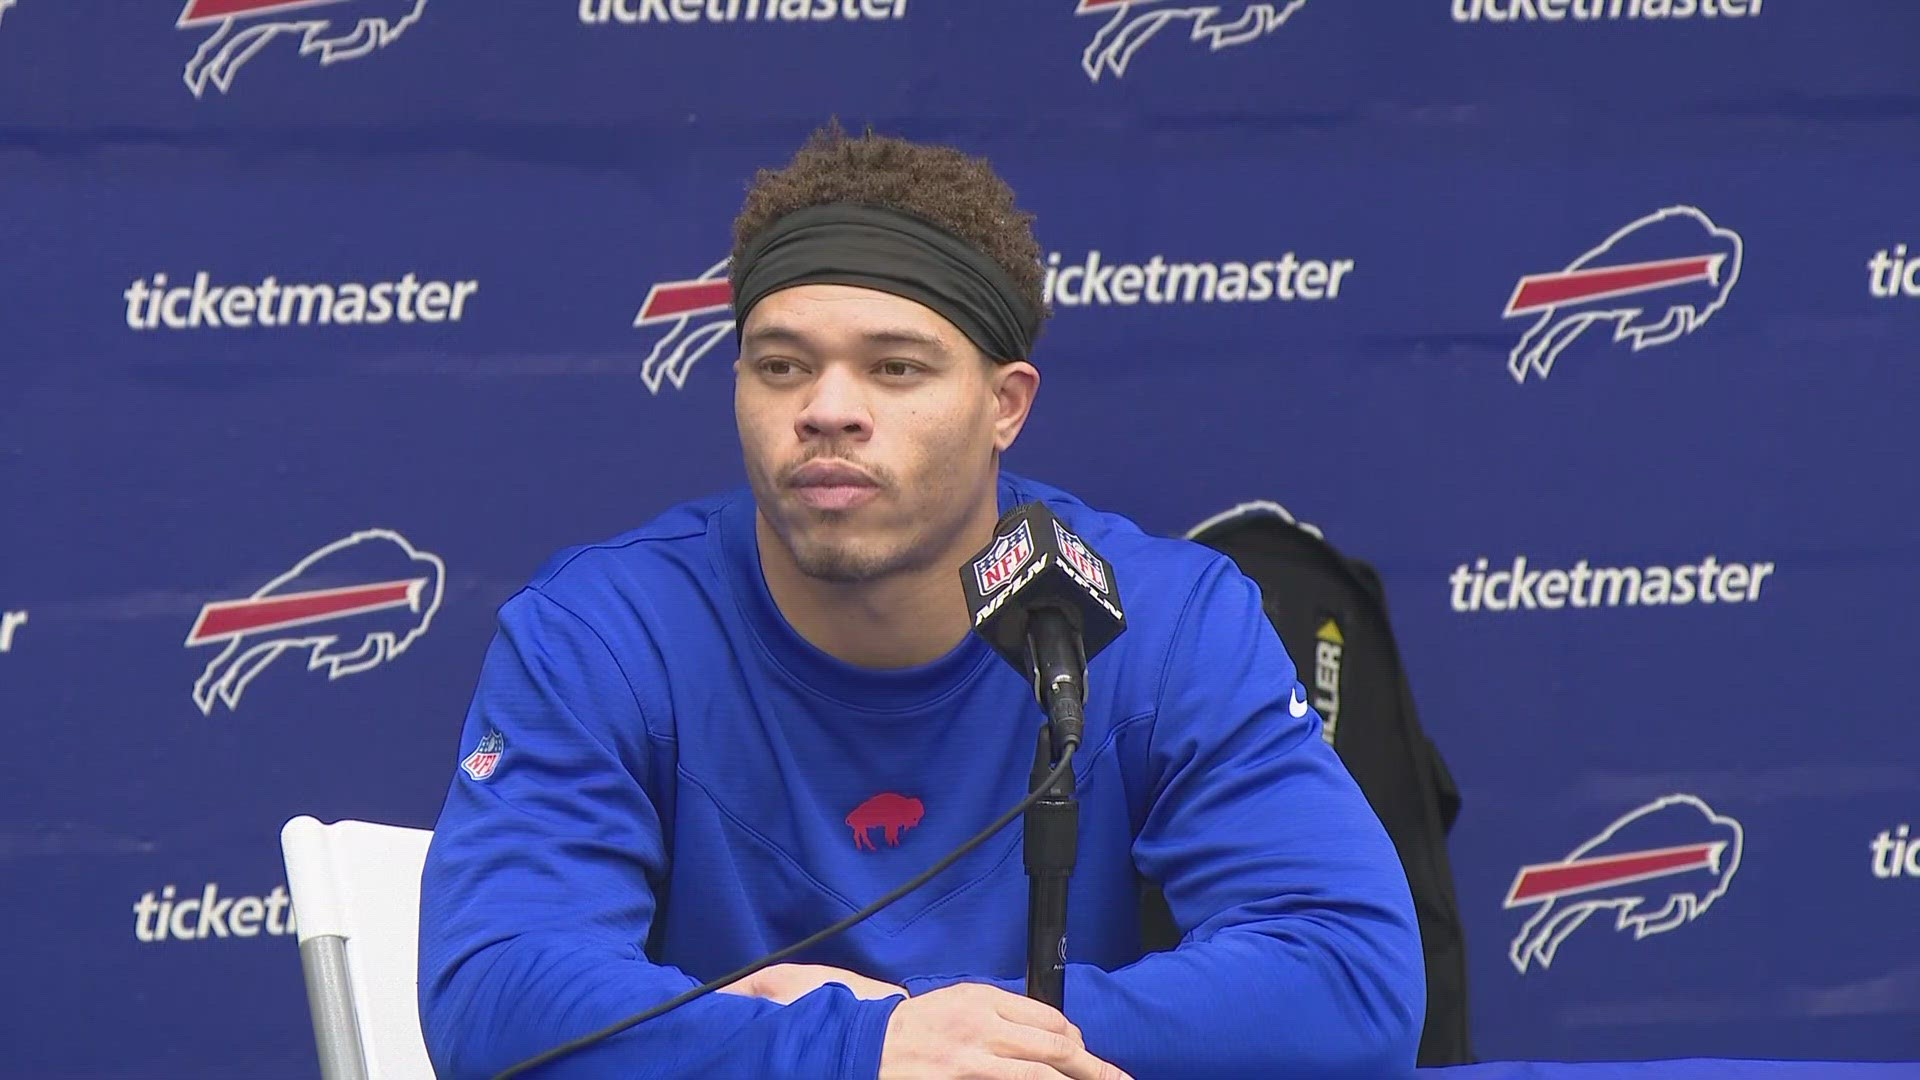 Bills news conference: Bills defensive back Taron Johnson looks ahead to Sunday night's game in Miami against the Dolphins.